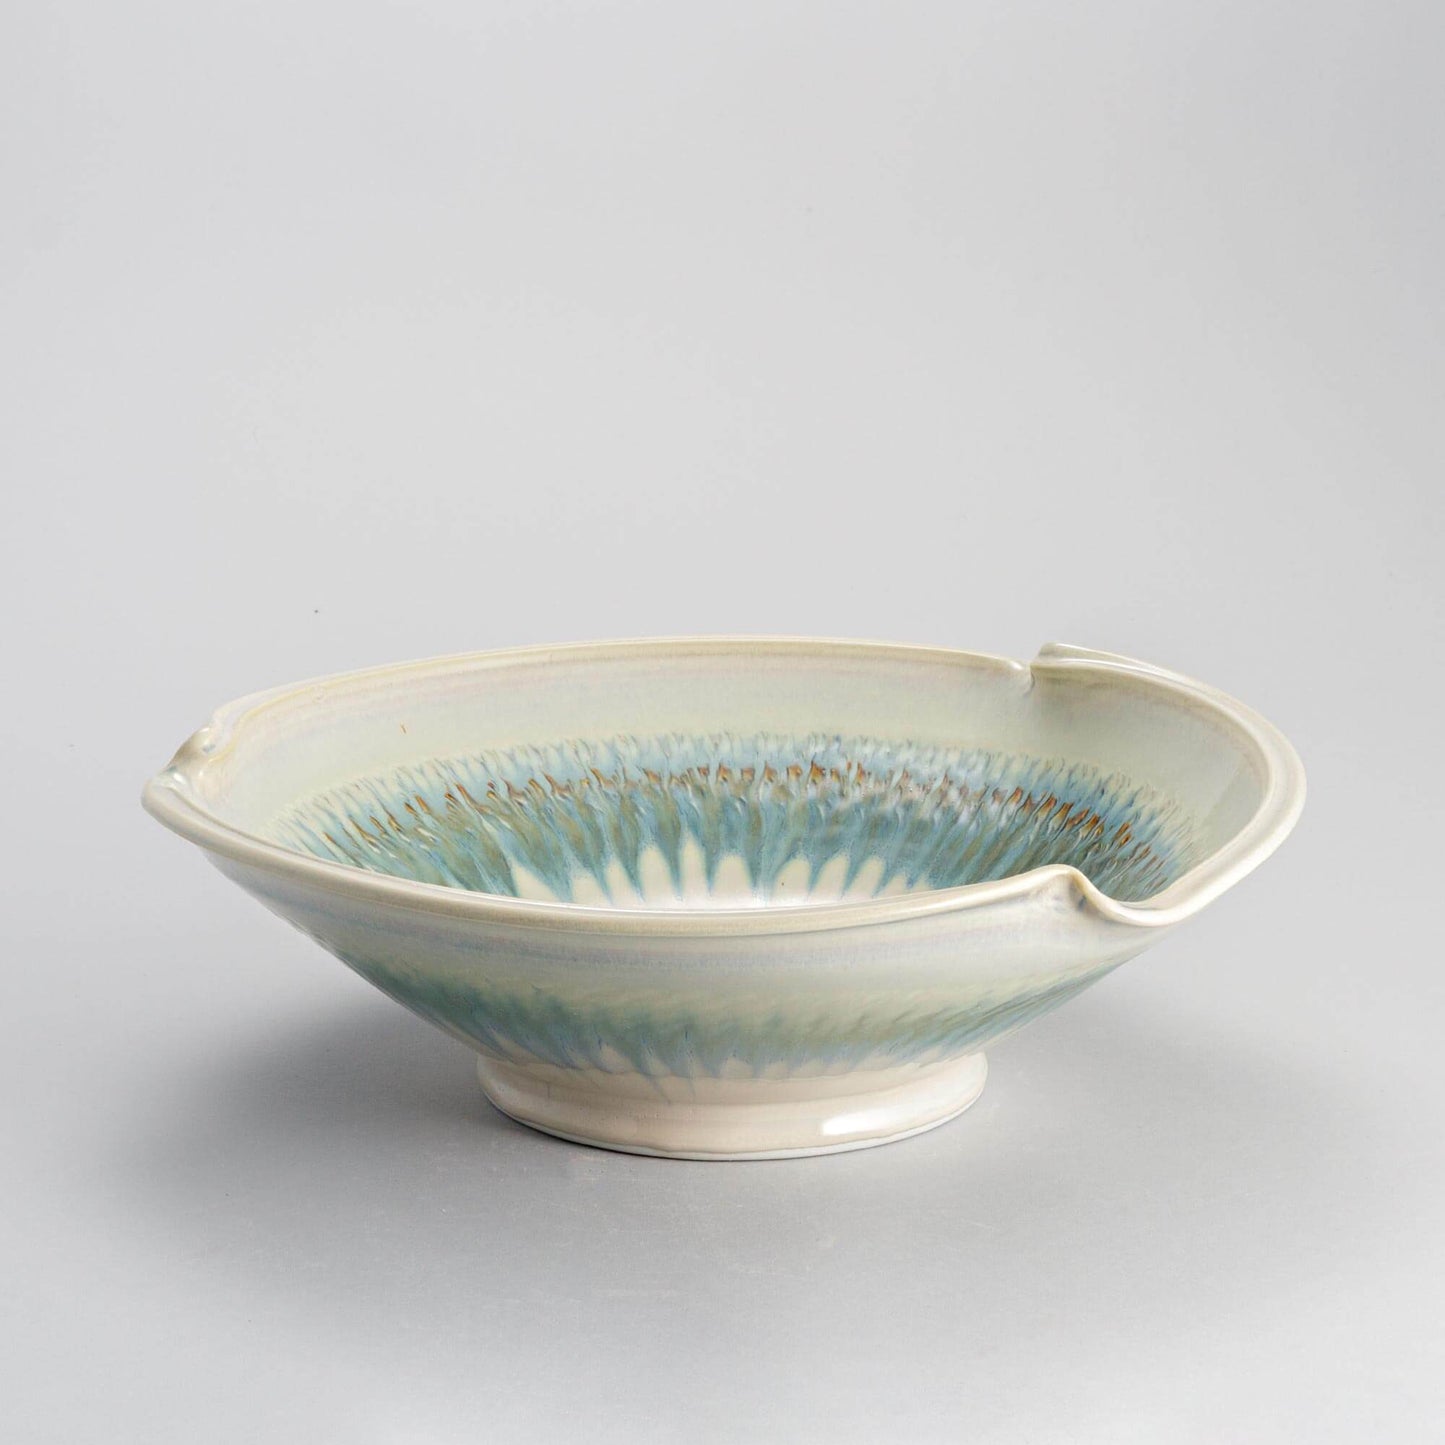 Handmade Pottery Signature Wave Bowl in Ivory & Blue pattern made by Georgetown Pottery in Maine